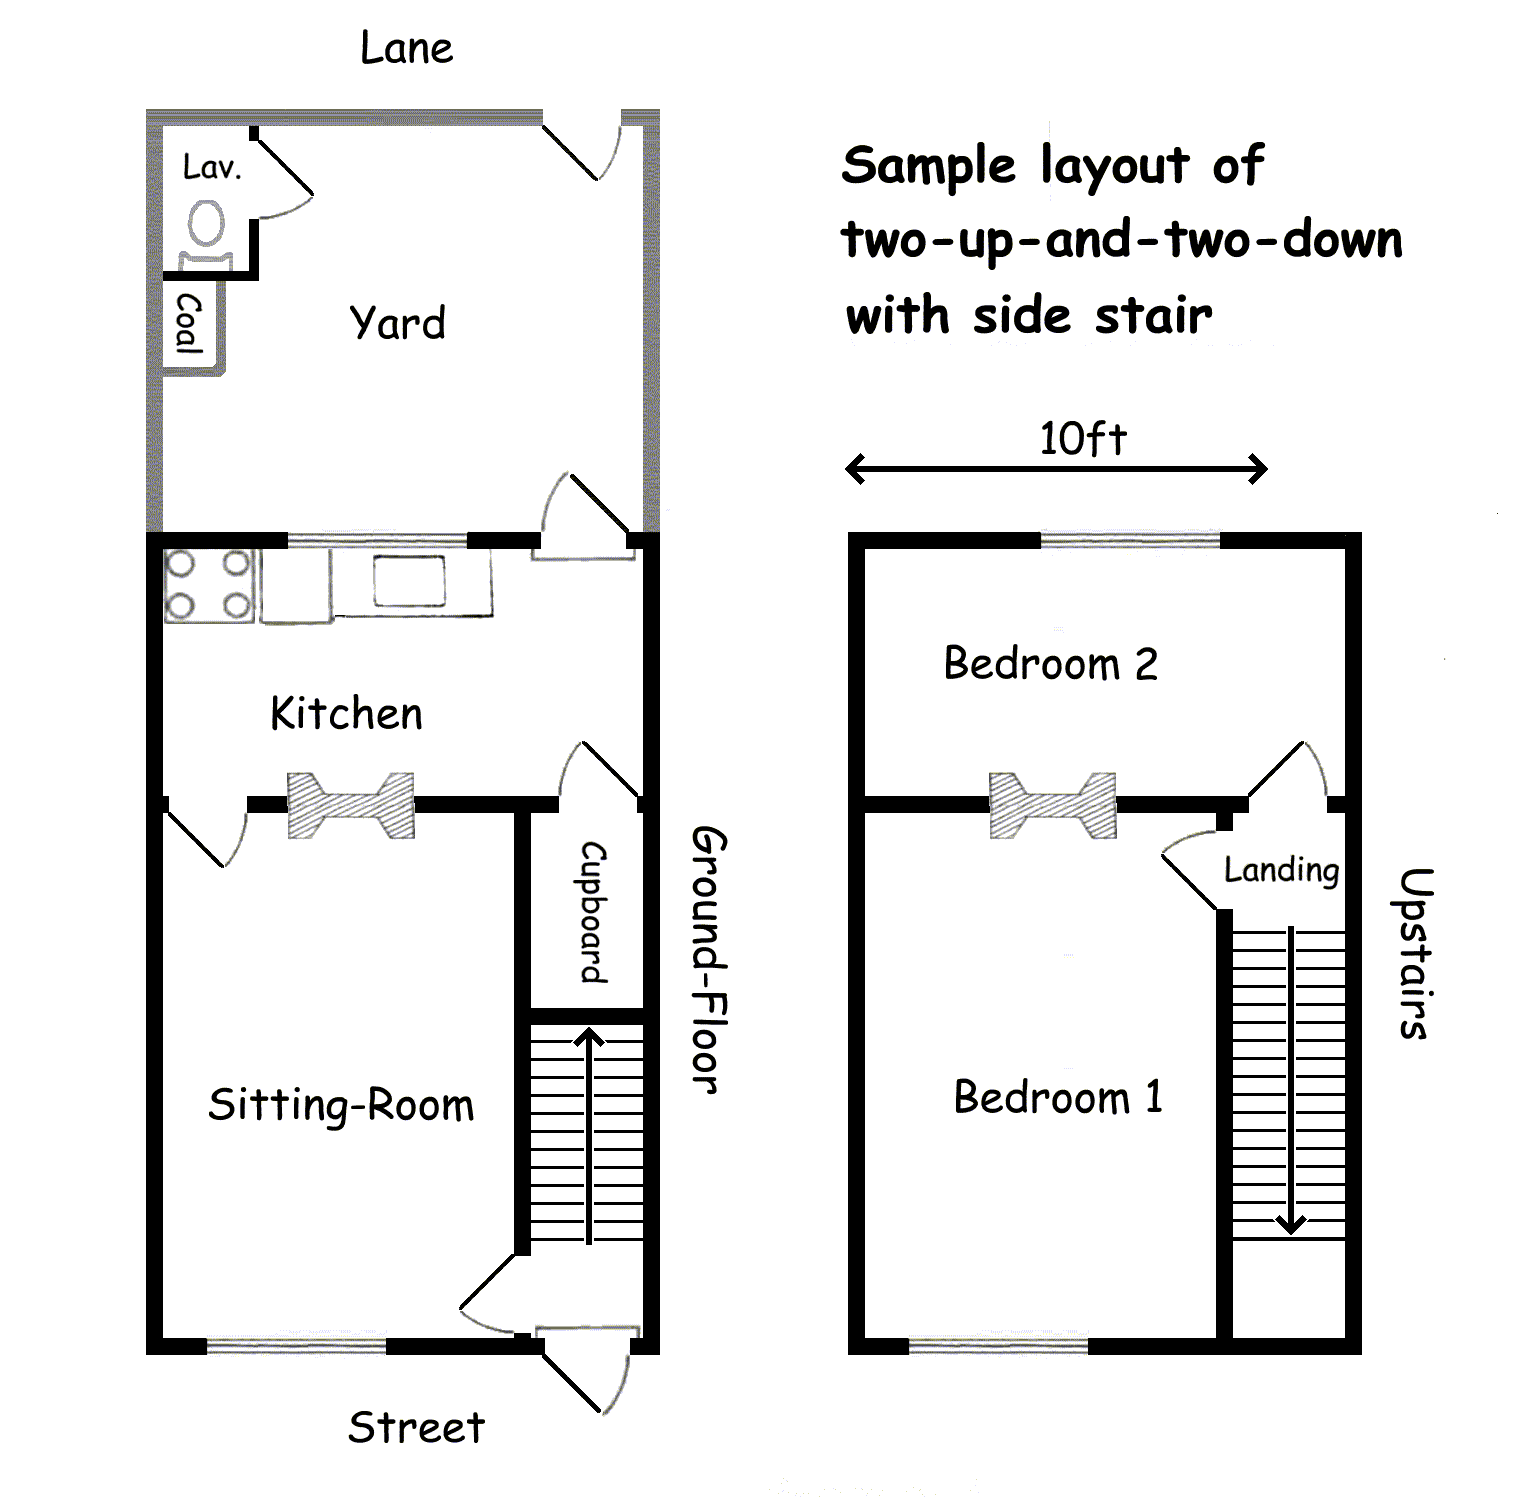 floor-plan of small house with side stair